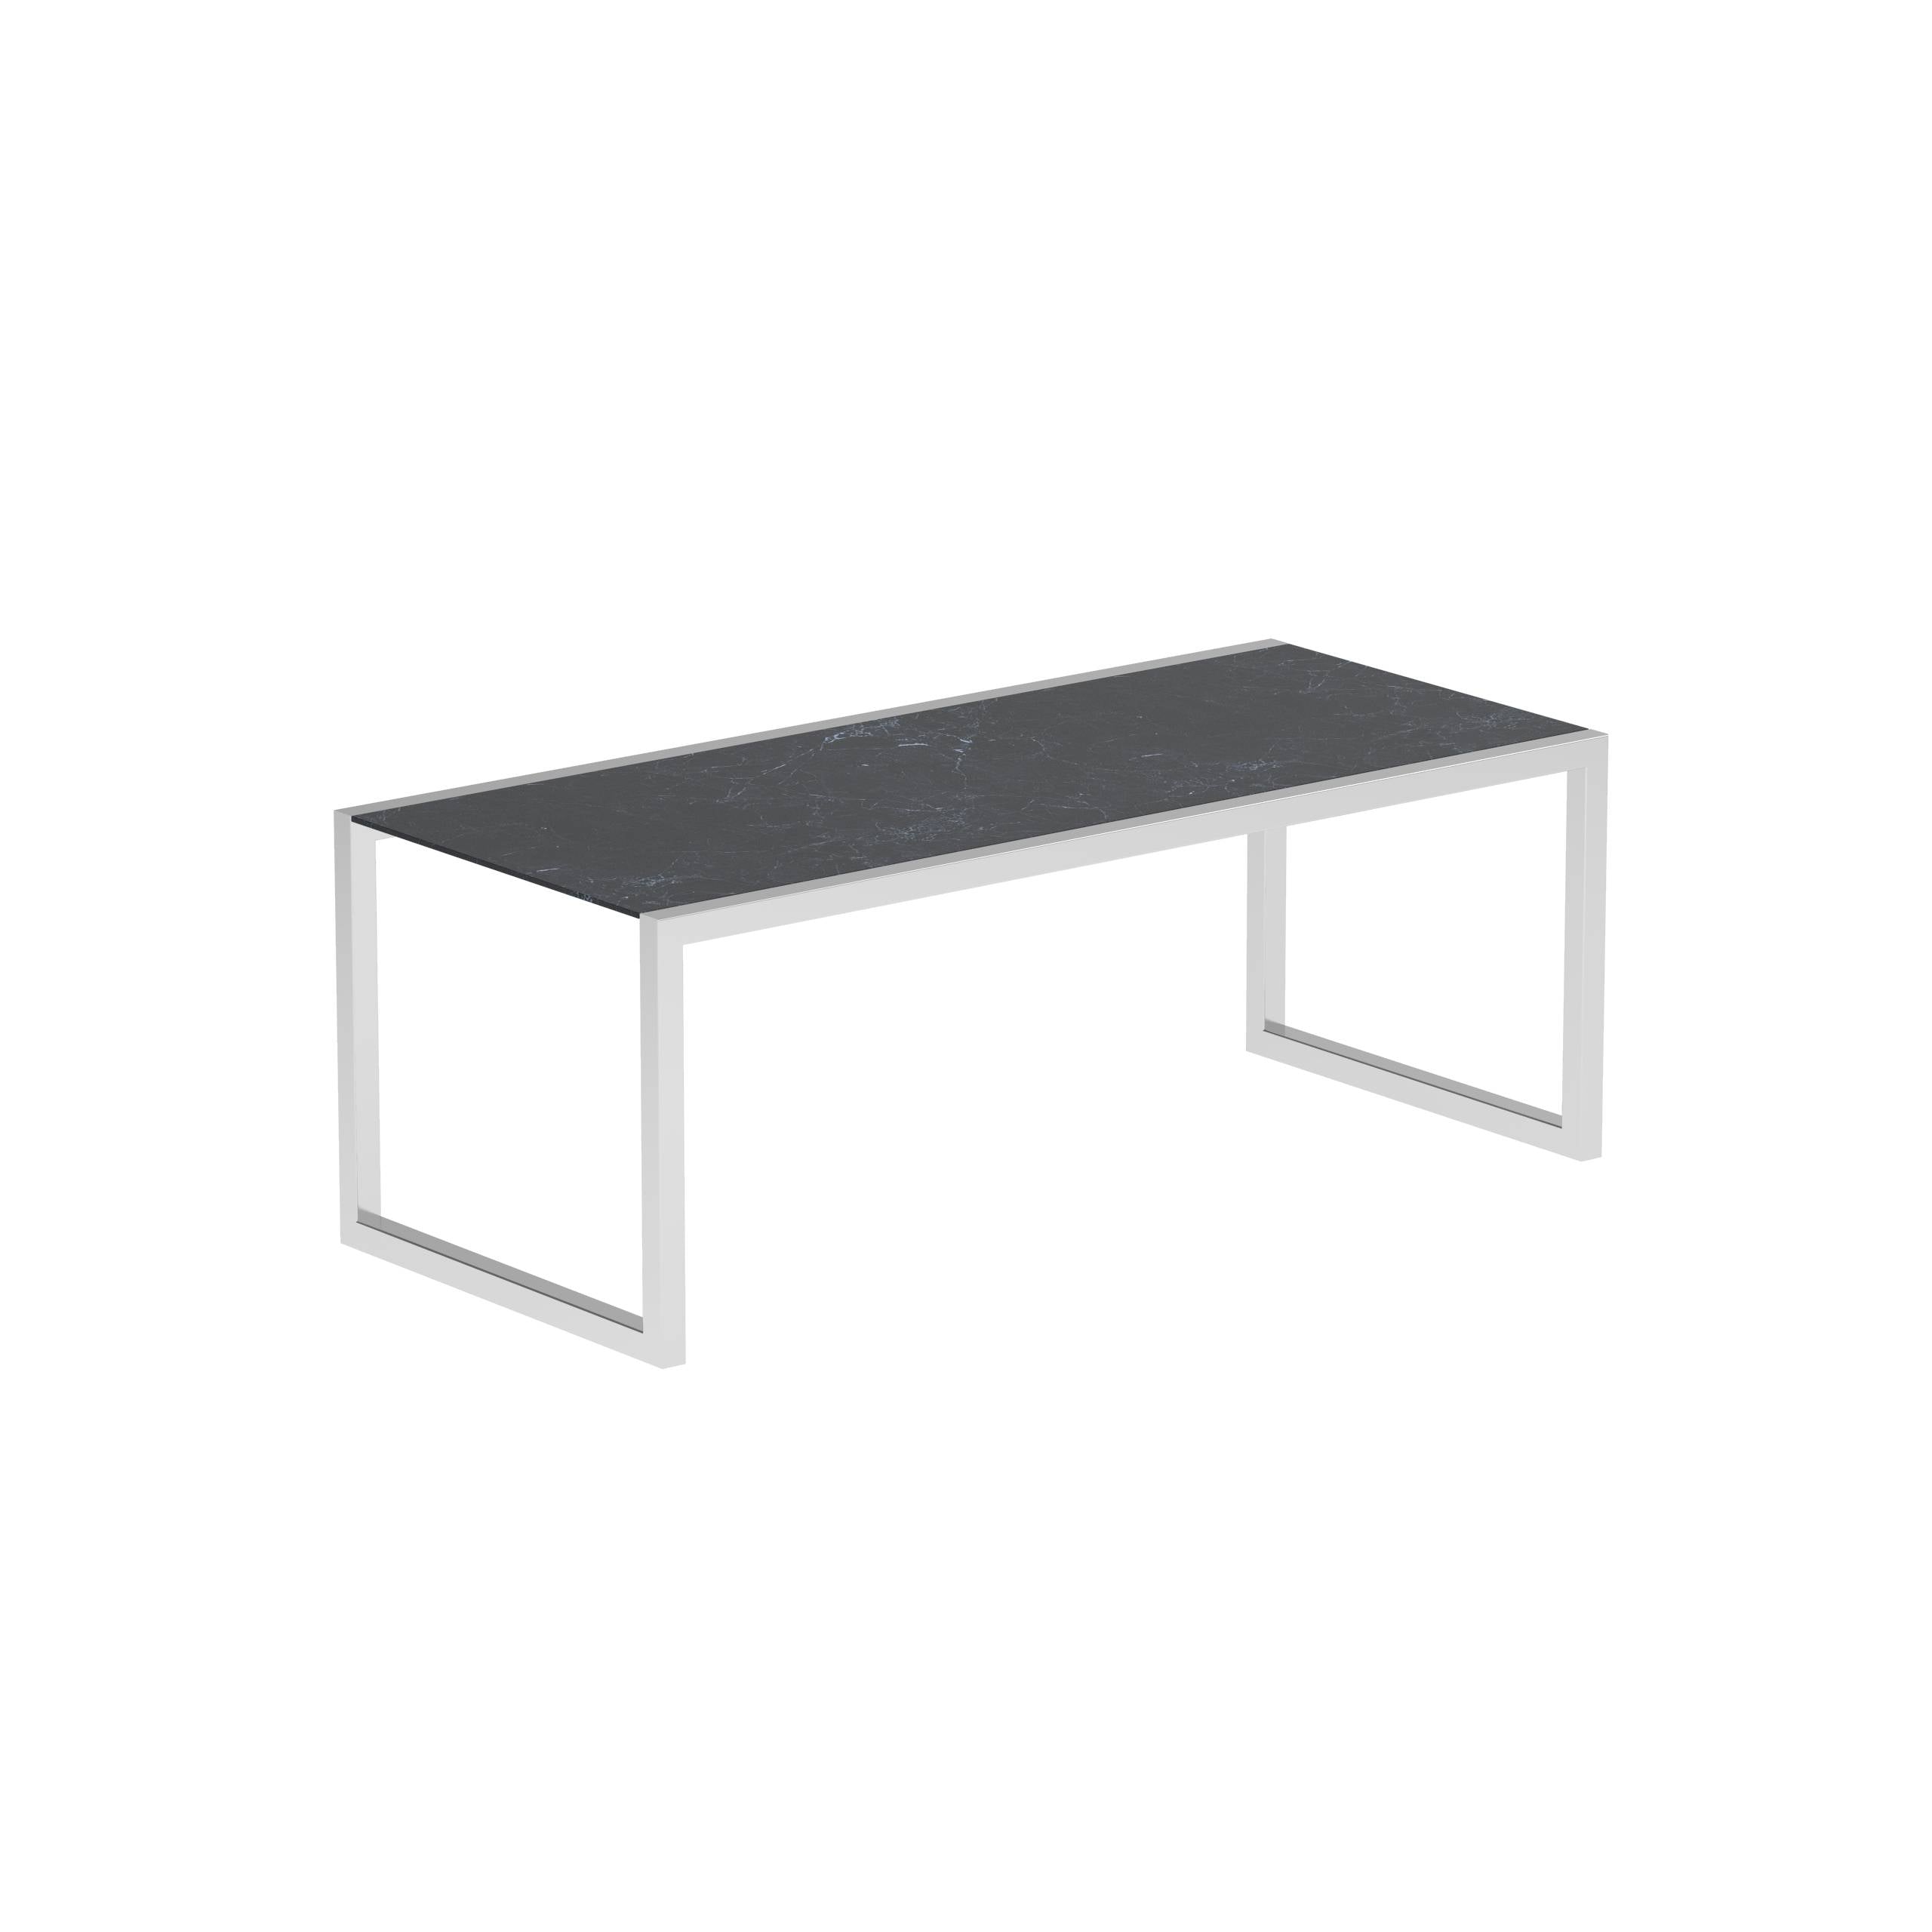 Ninix Table 200x90cm With Stainless Steel El.Pol. And Ceramic Nero Marquina